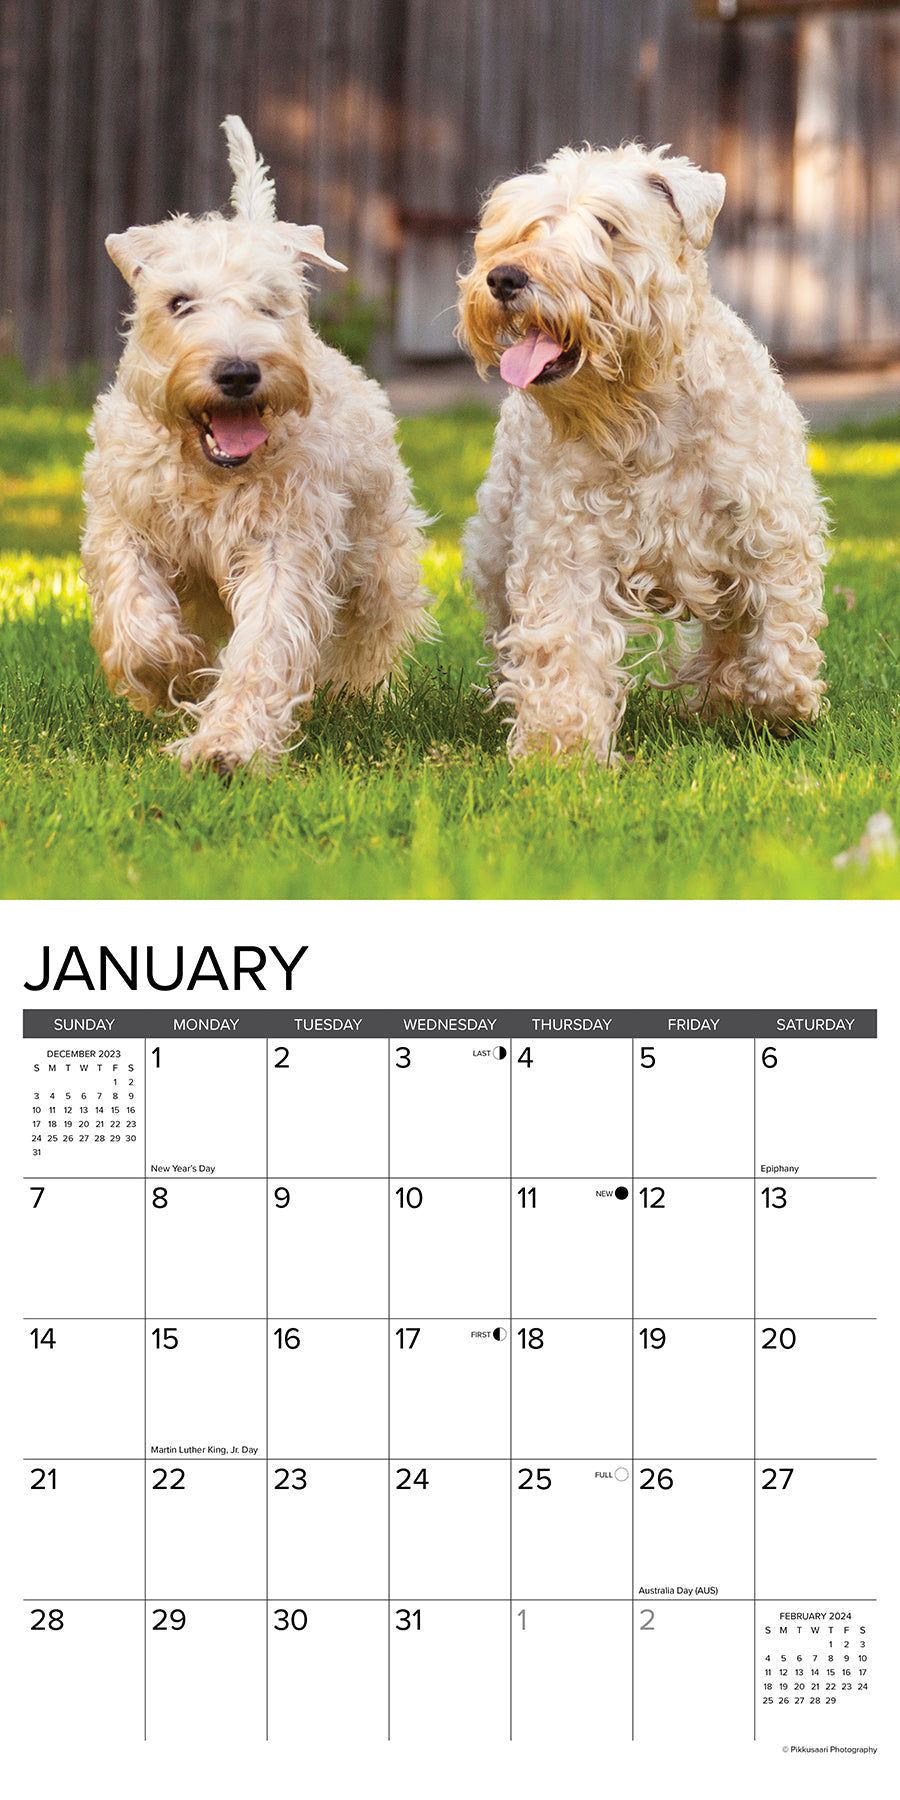 2024 Just Wheaton Terriers - Square Wall Calendar